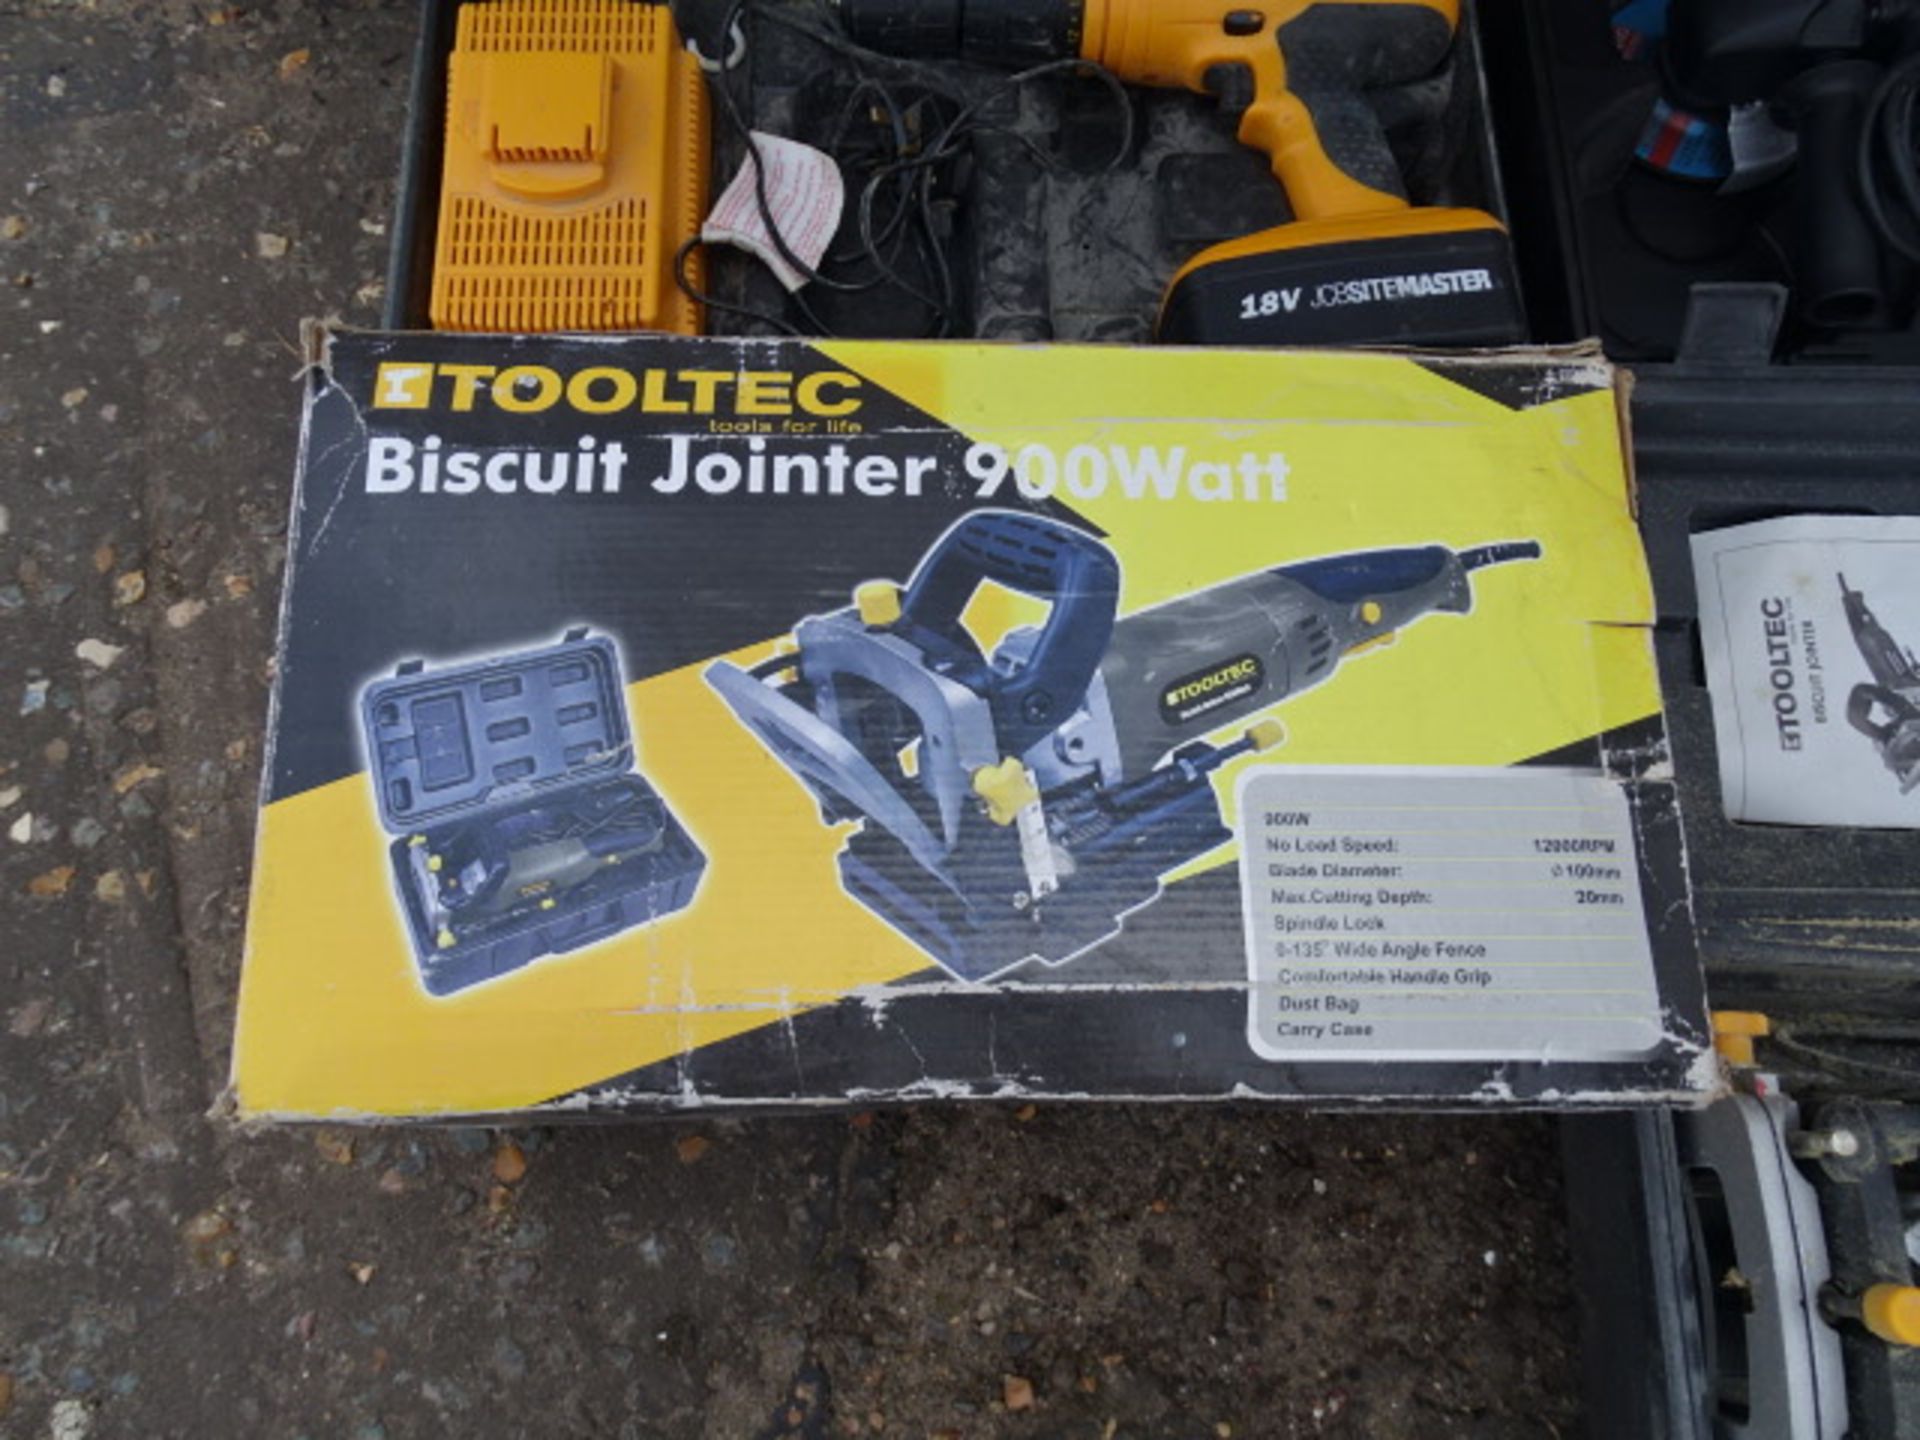 JCB cordless drill, angle grinder and Tooltec biscuit jointer - Image 5 of 5